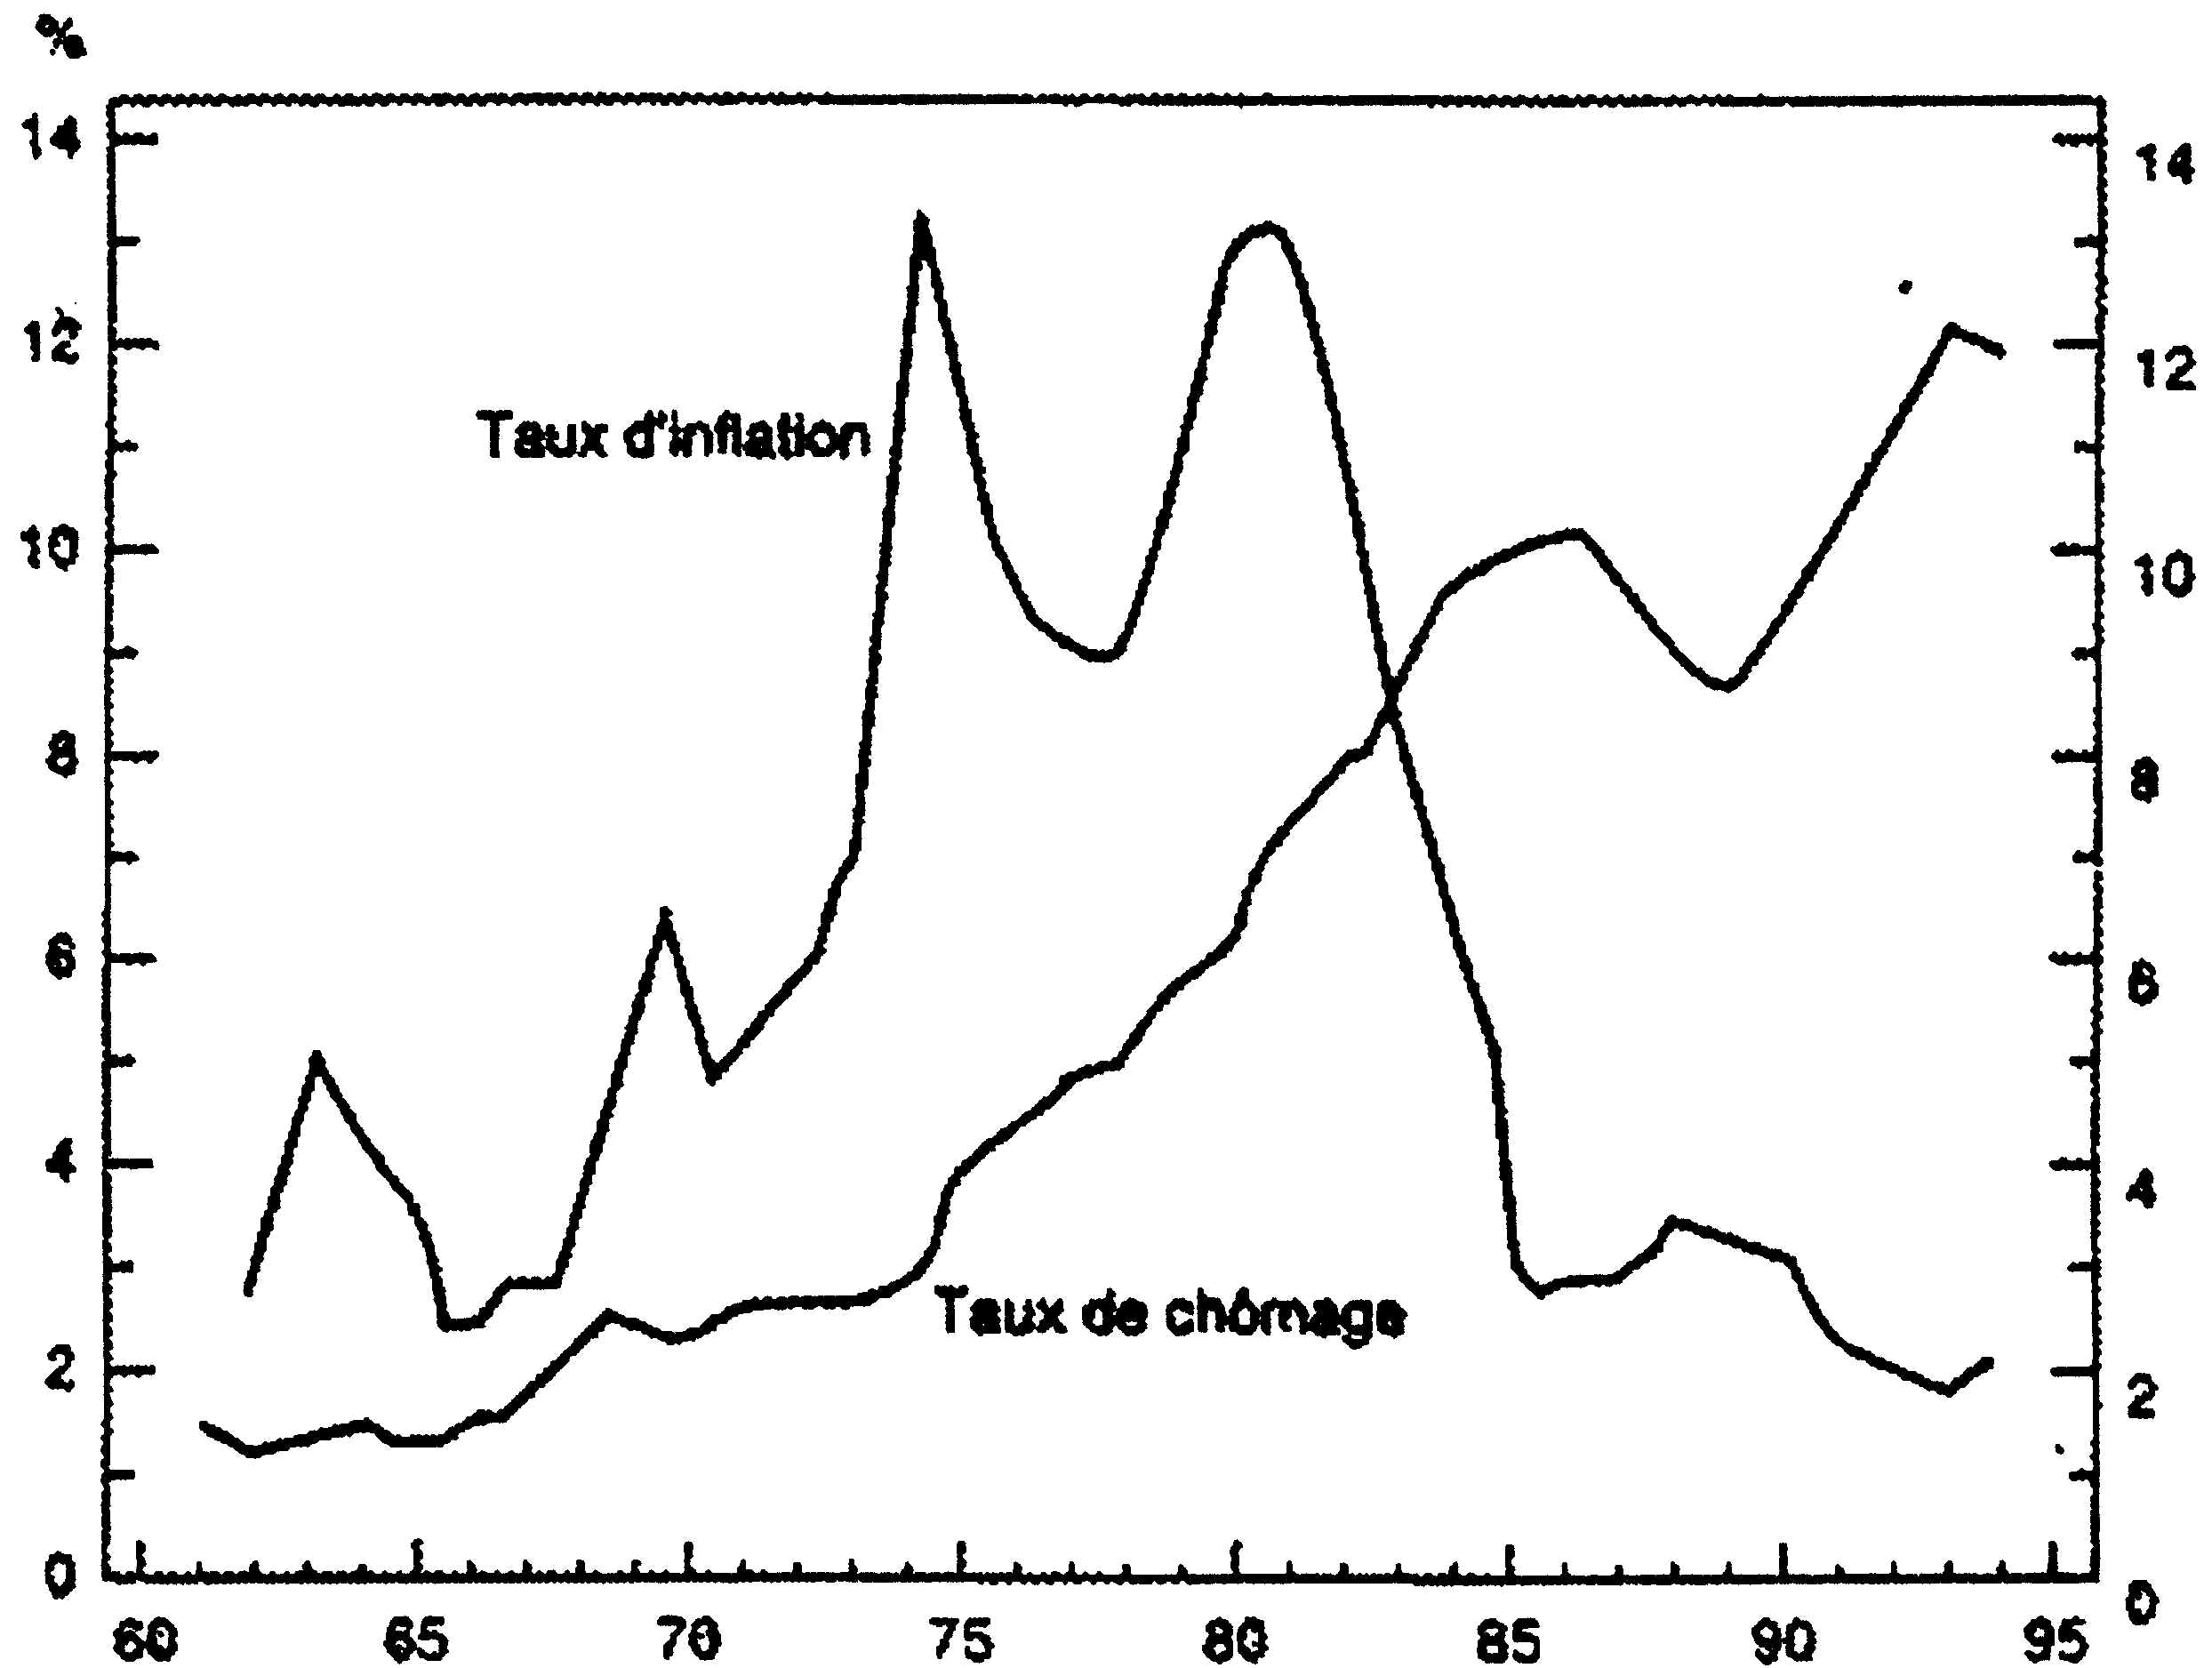 taux-chomage.png